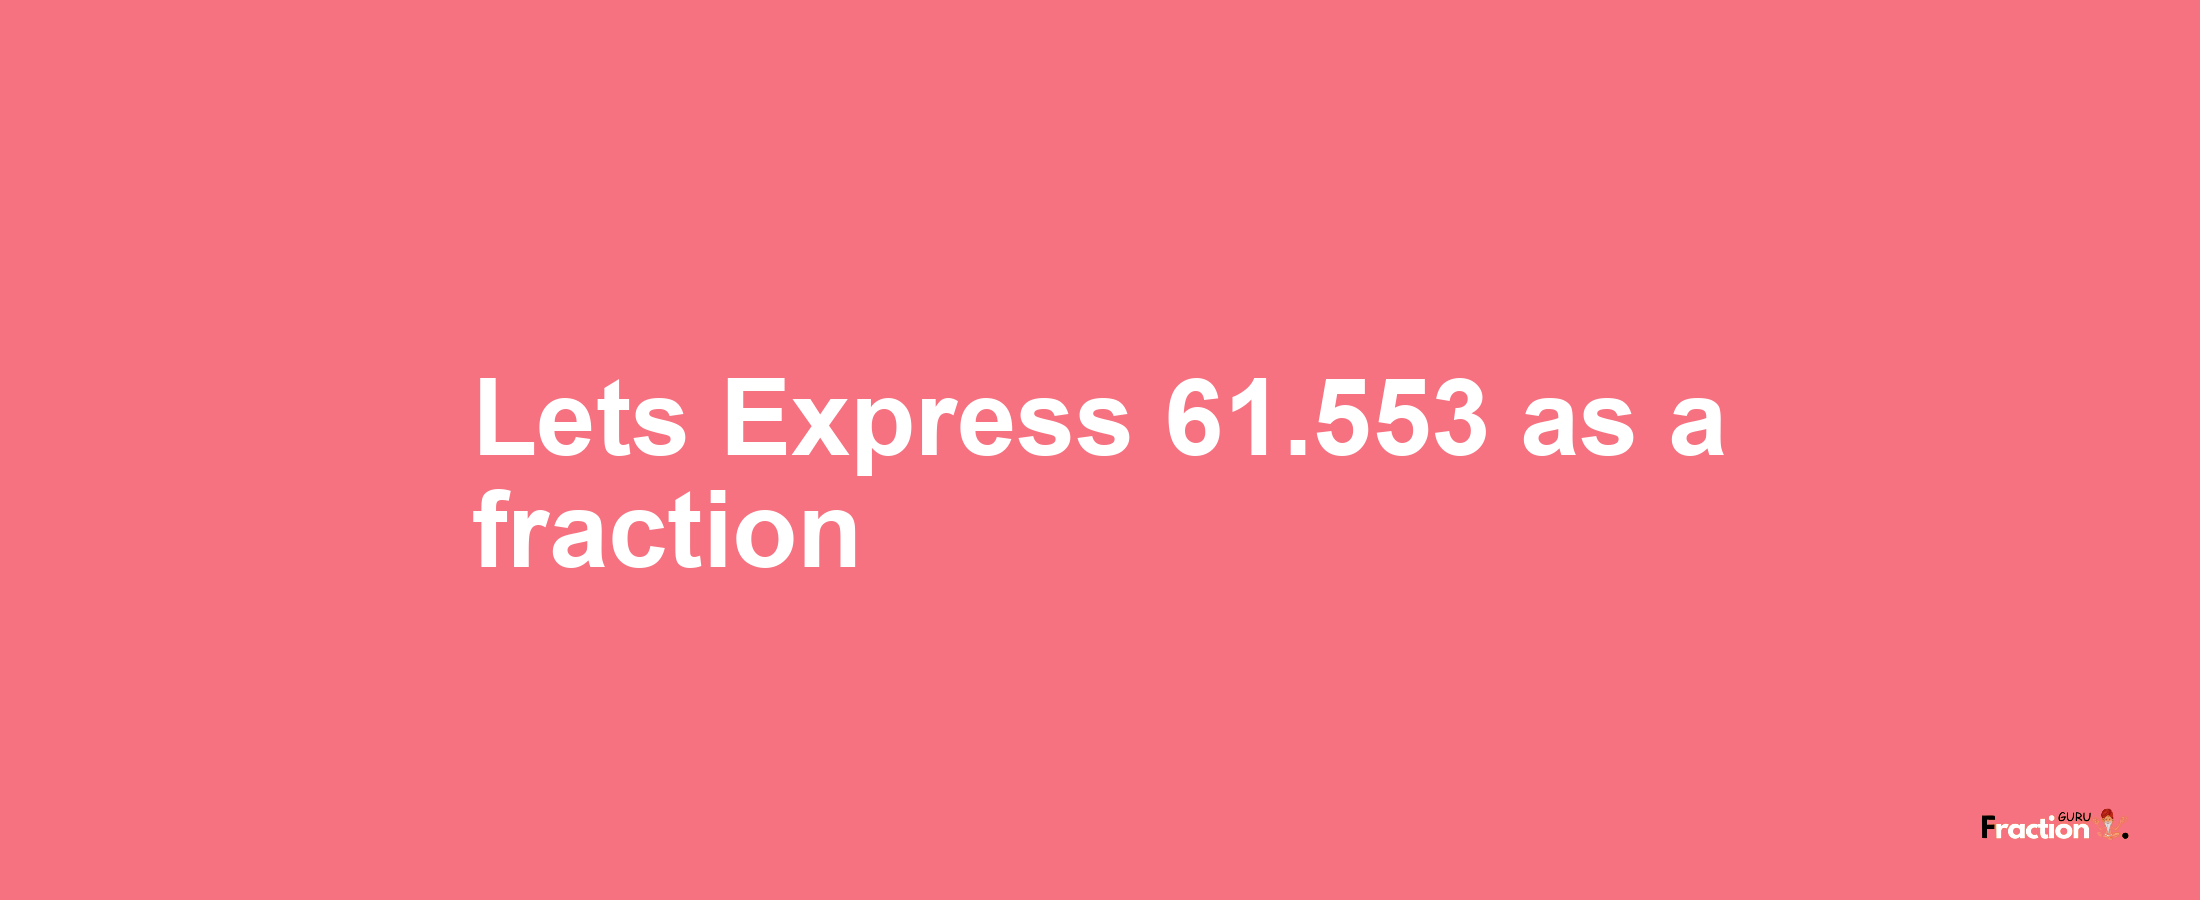 Lets Express 61.553 as afraction